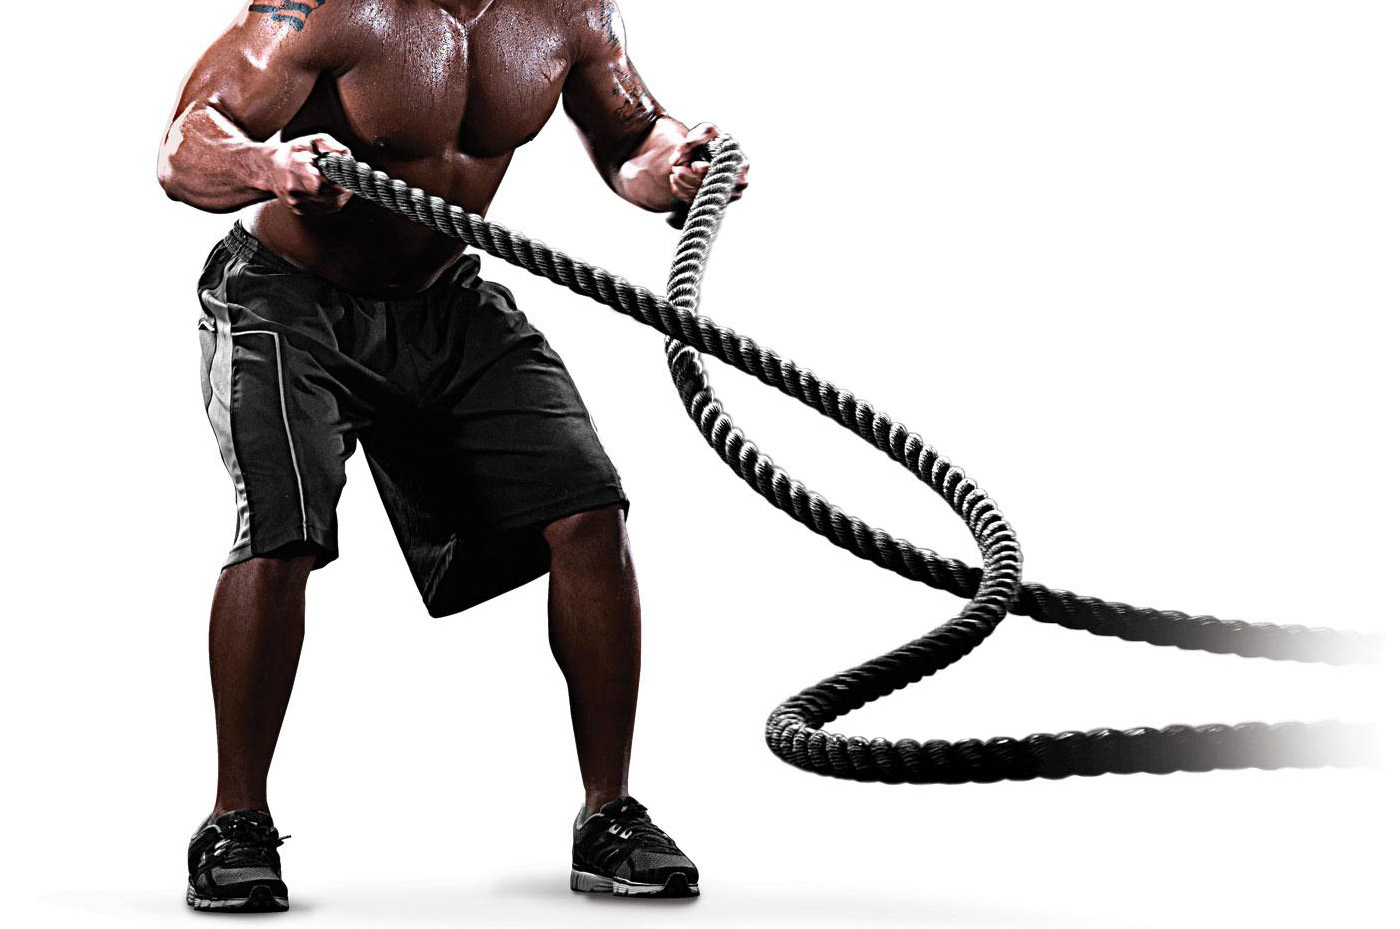  Rope Trainer Workout for Build Muscle